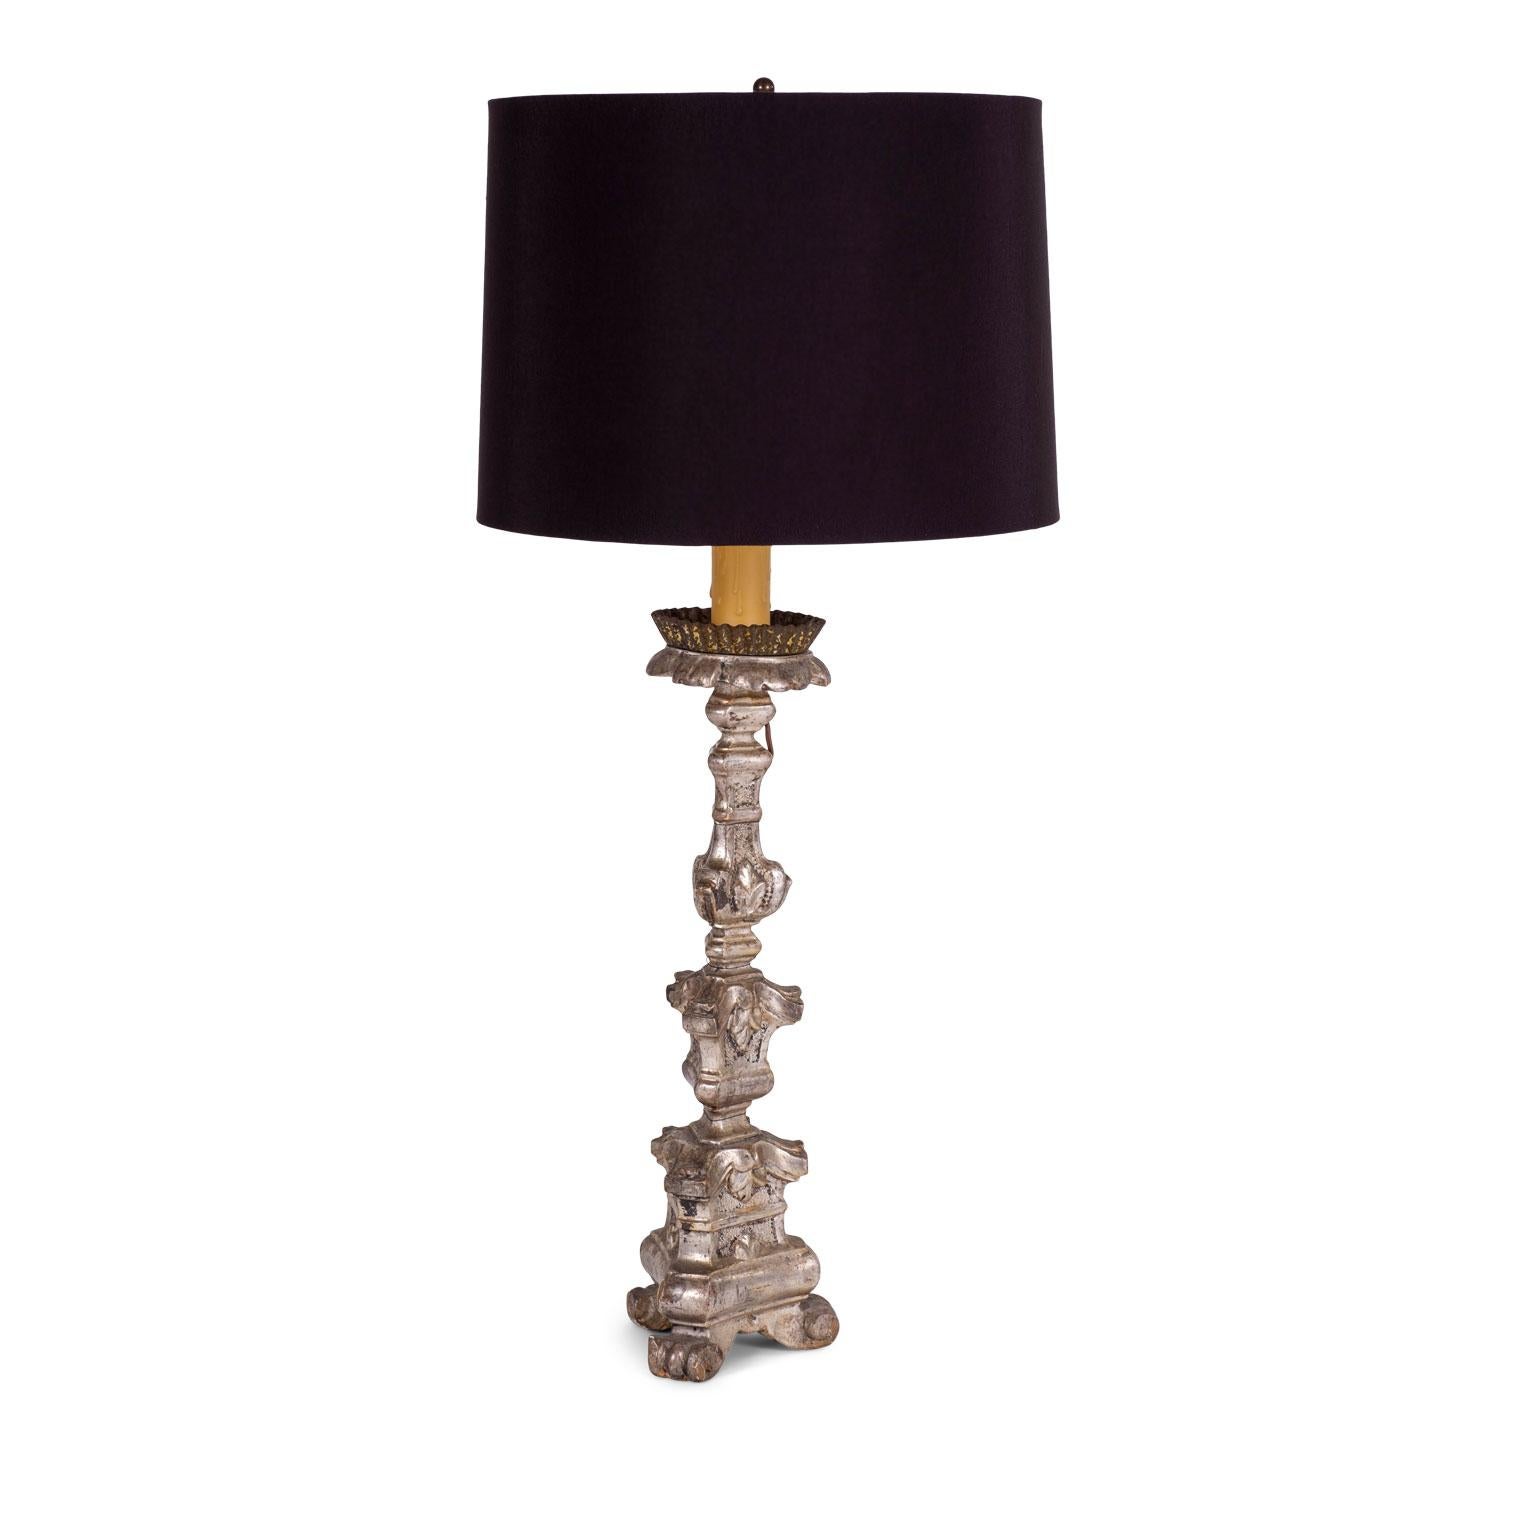 Silvered candlestick lamp: hand carved and silvered Italian candlestick wired as a table lamp with black complementary shade (listed measurements include shade).

Note: Original/early finish on antique and vintage metal will include some, or all, of